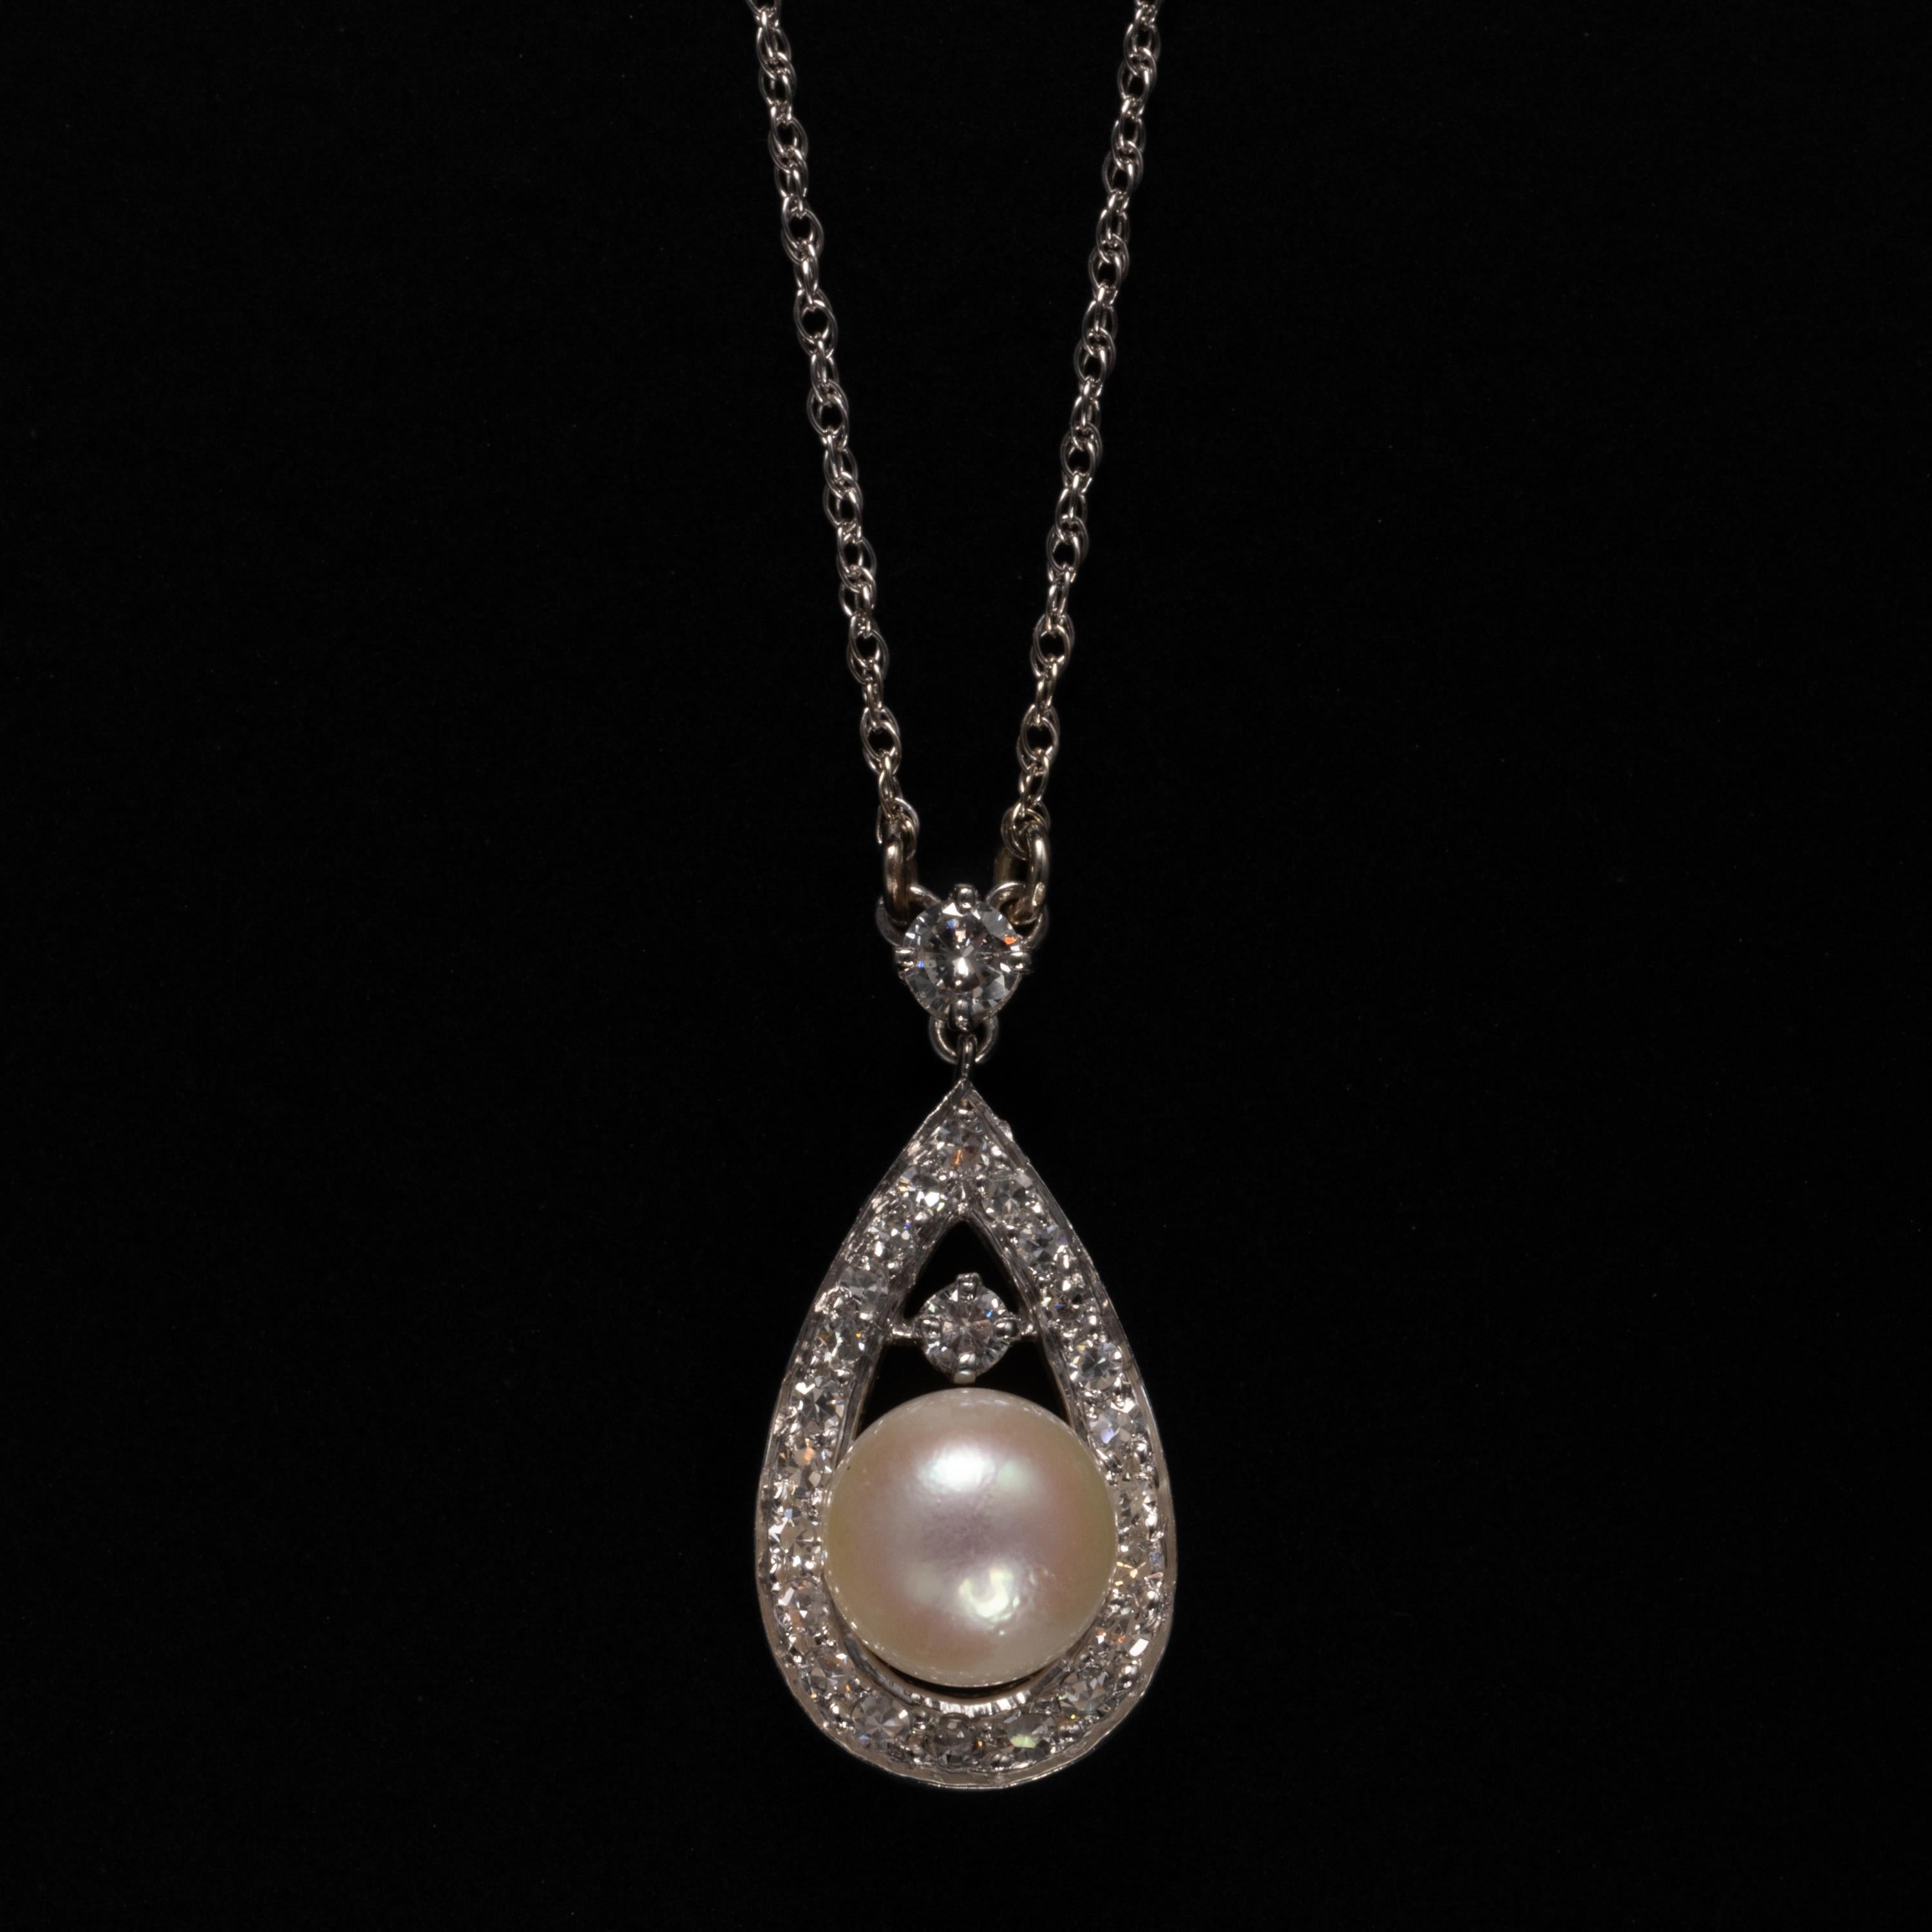 A luminous creamy cultured 7.16mm cultured Akoya pearl with a light pink overtone is the focal point of this hand-crafted 18K white gold pear-shaped pendant. 

Twenty-two tiny, sparkling white diamonds frame the pearl and one rests atop it. A .10